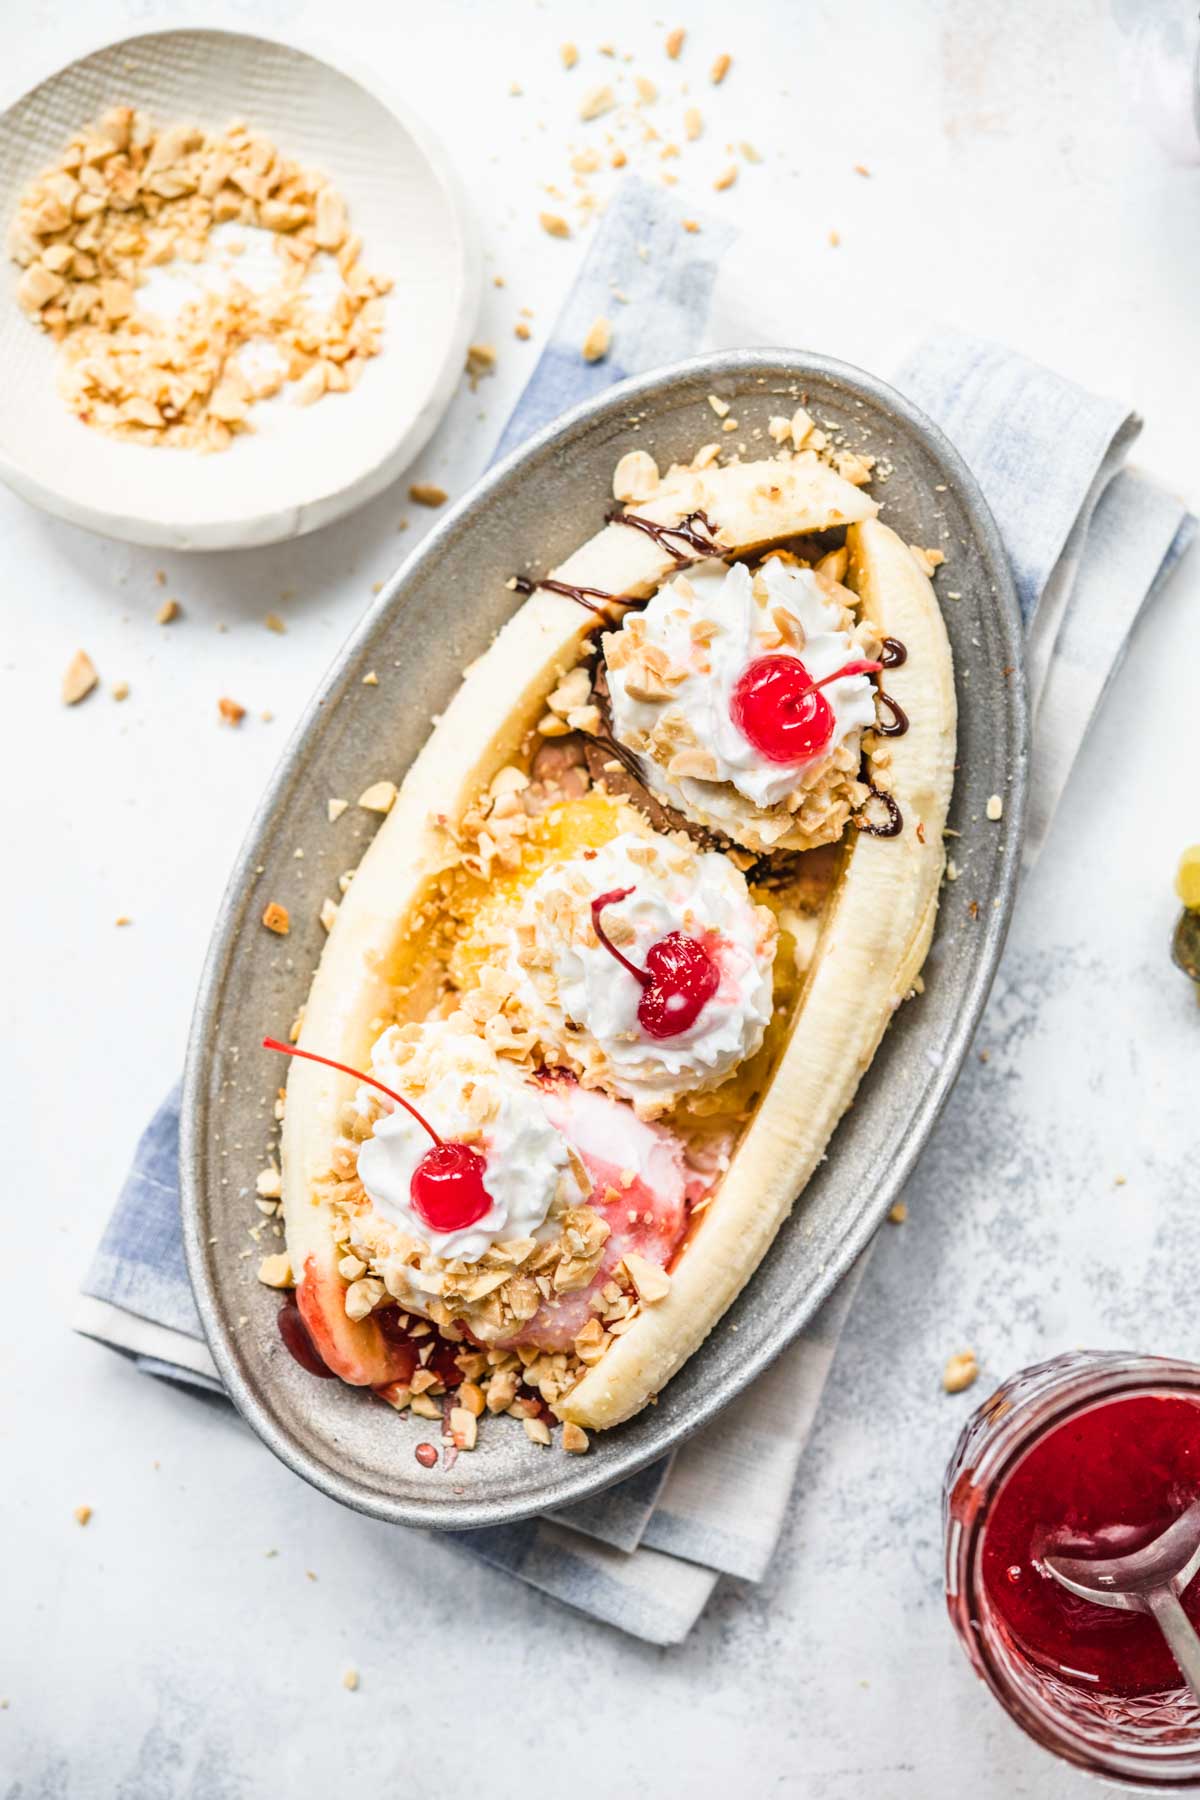 Banana Split on plate with chocolate, pineapple, and strawberry topping